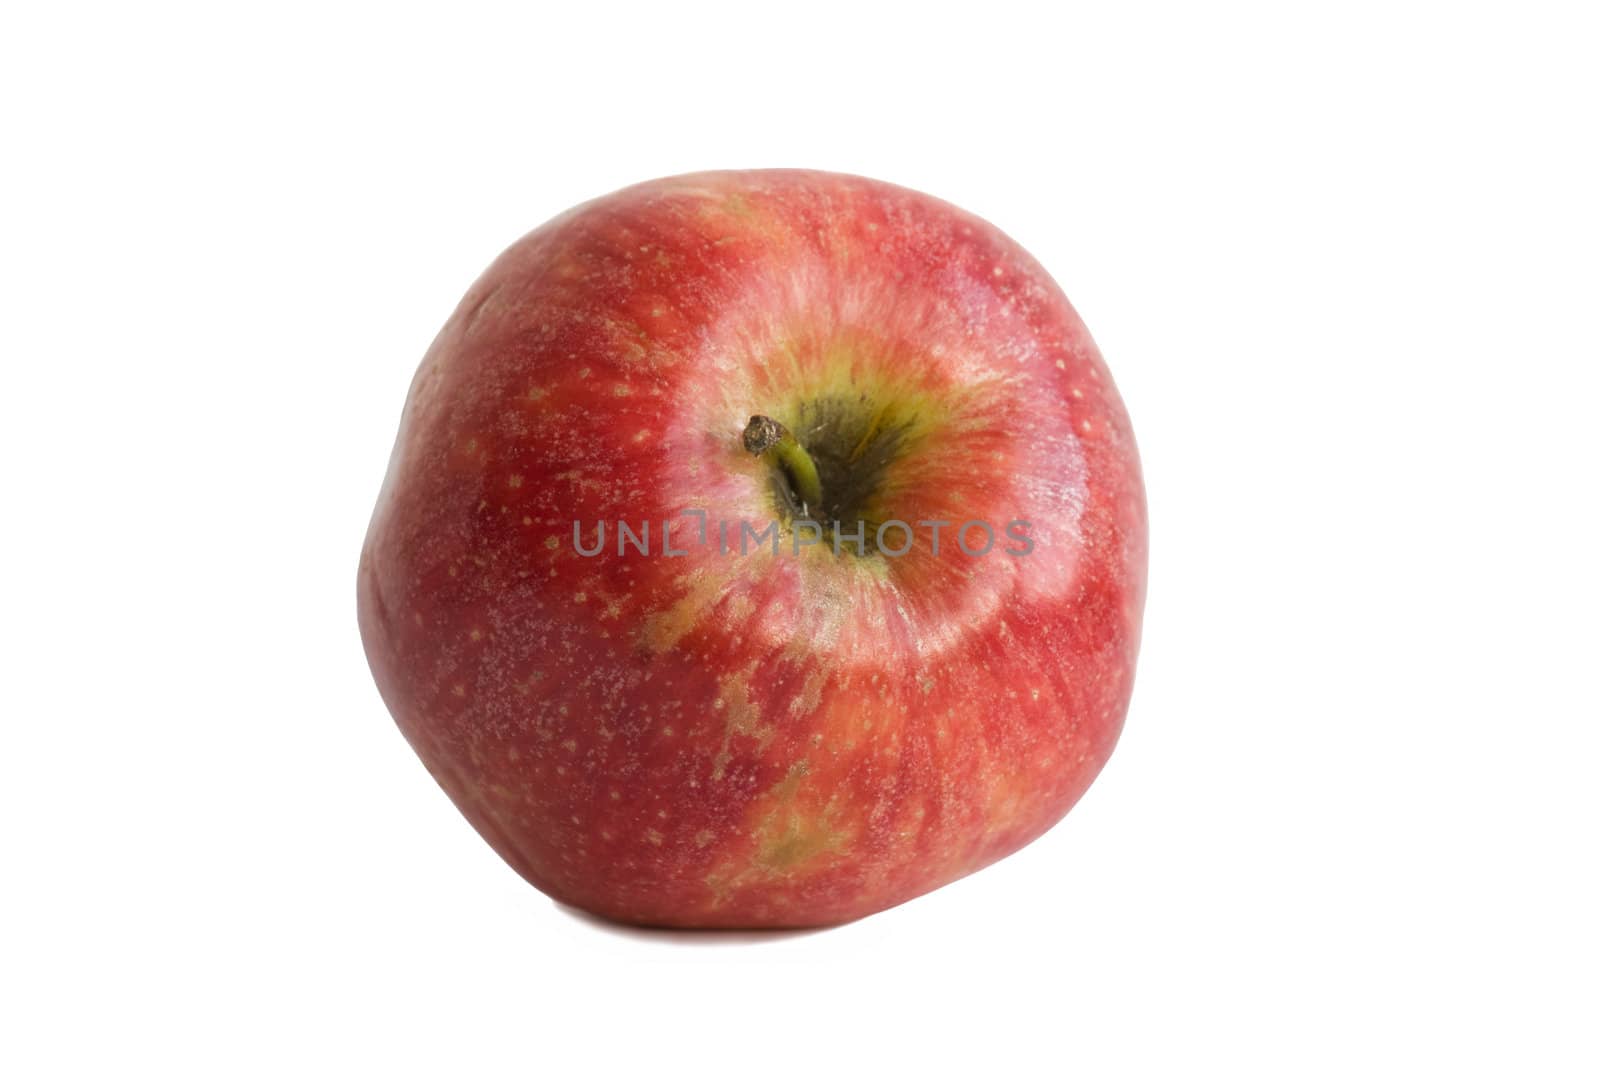 The beautiful red apple is isolated on a white background.
